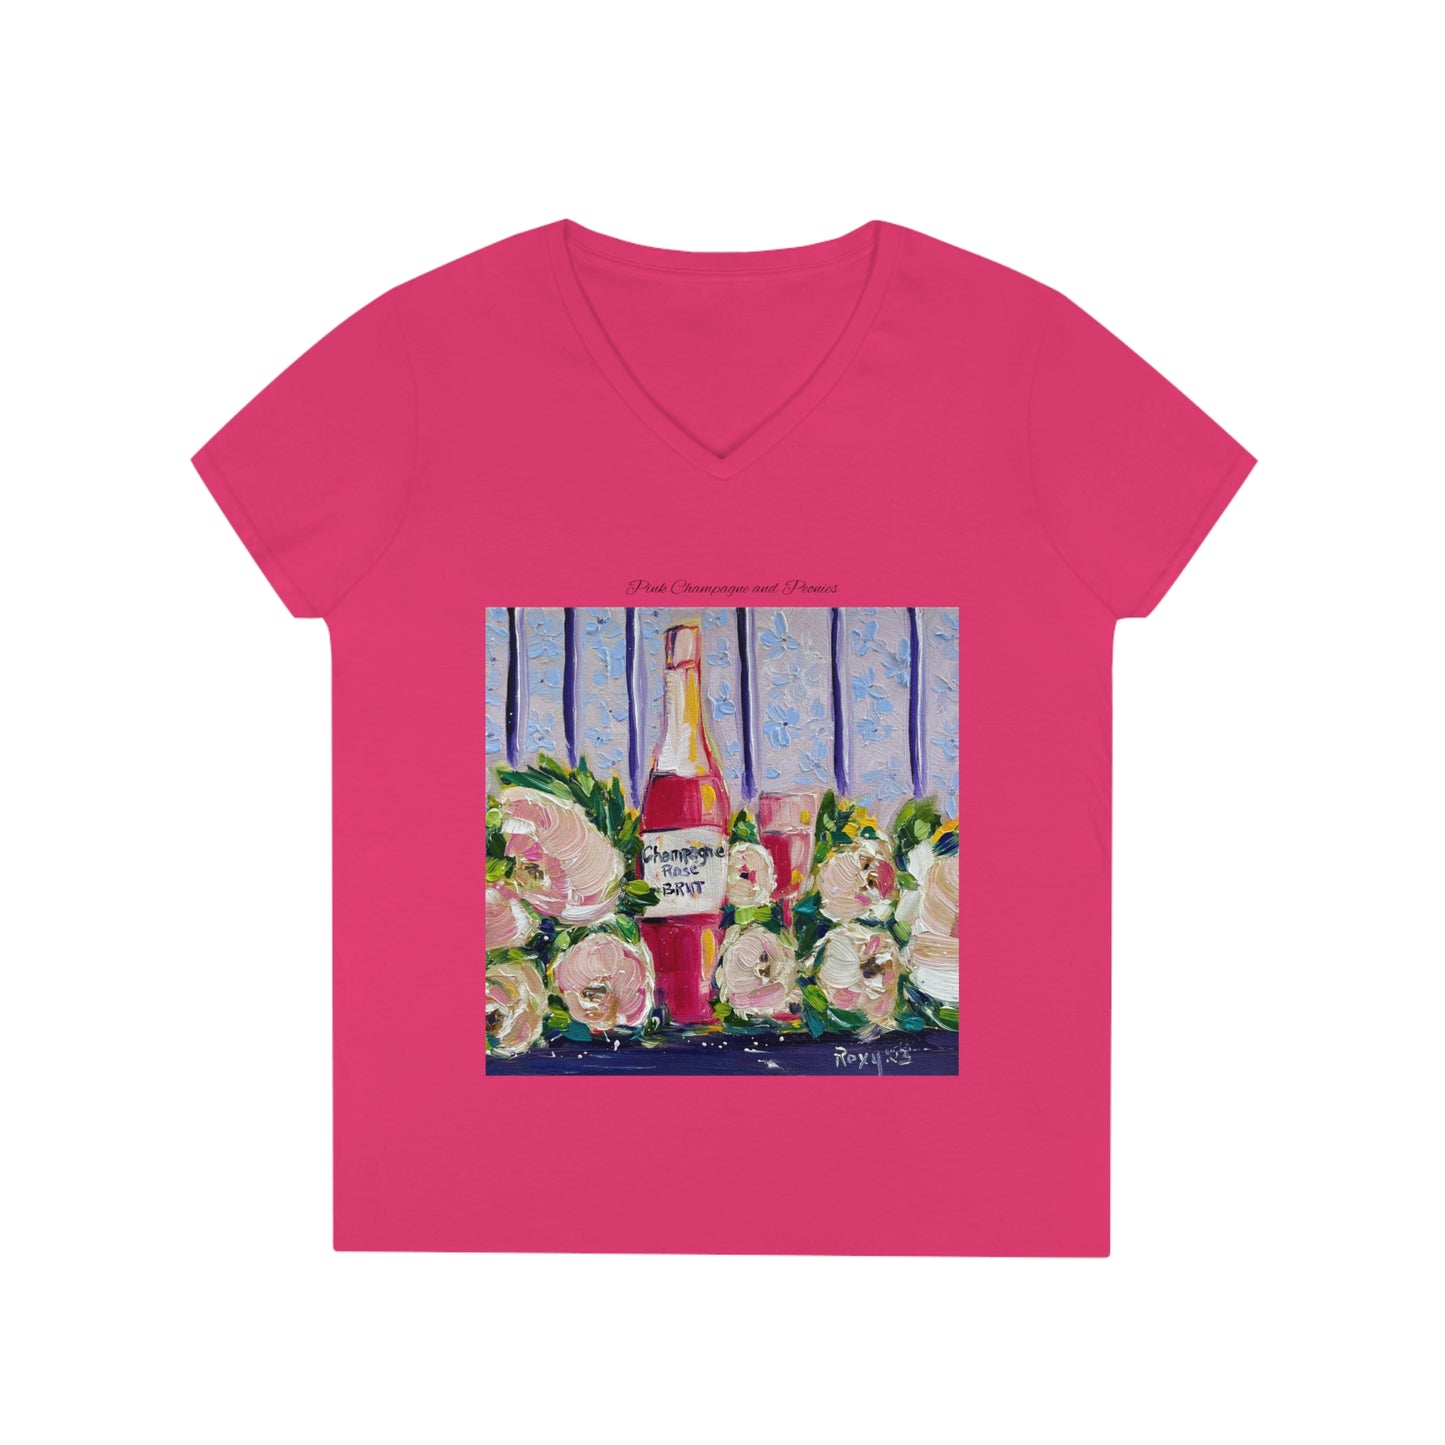 Pink Champagne and Peonies Ladies' V-Neck T-Shirt